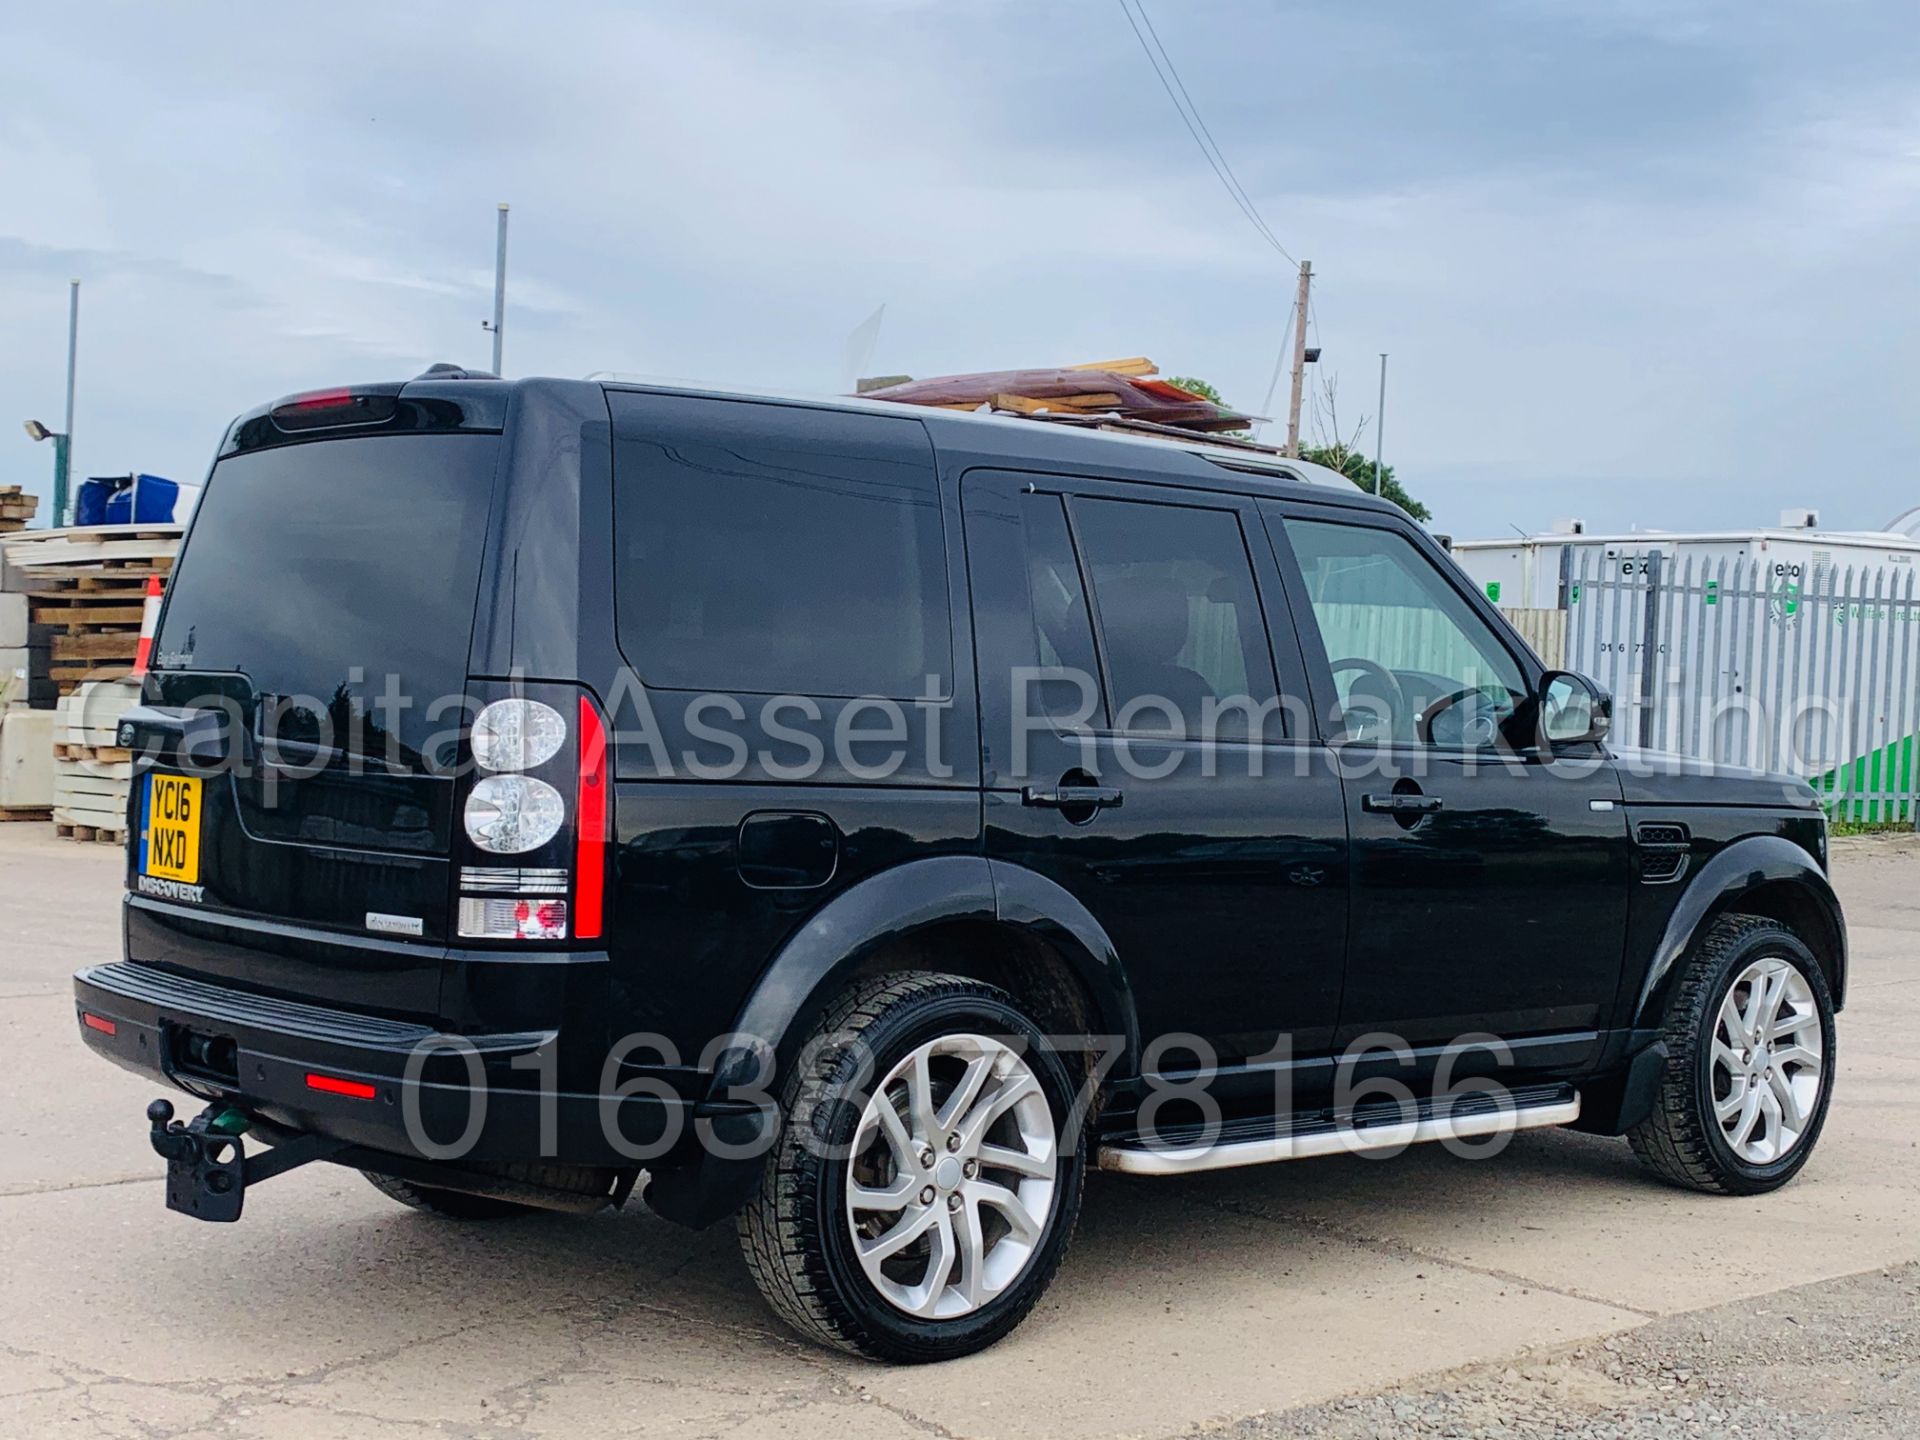 (On Sale) LAND ROVER DISCOVERY 4 *LANDMARK* 7 SEATER SUV (2016) '3.0 SDV6 - 8 SPEED AUTO' (1 OWNER) - Image 13 of 65